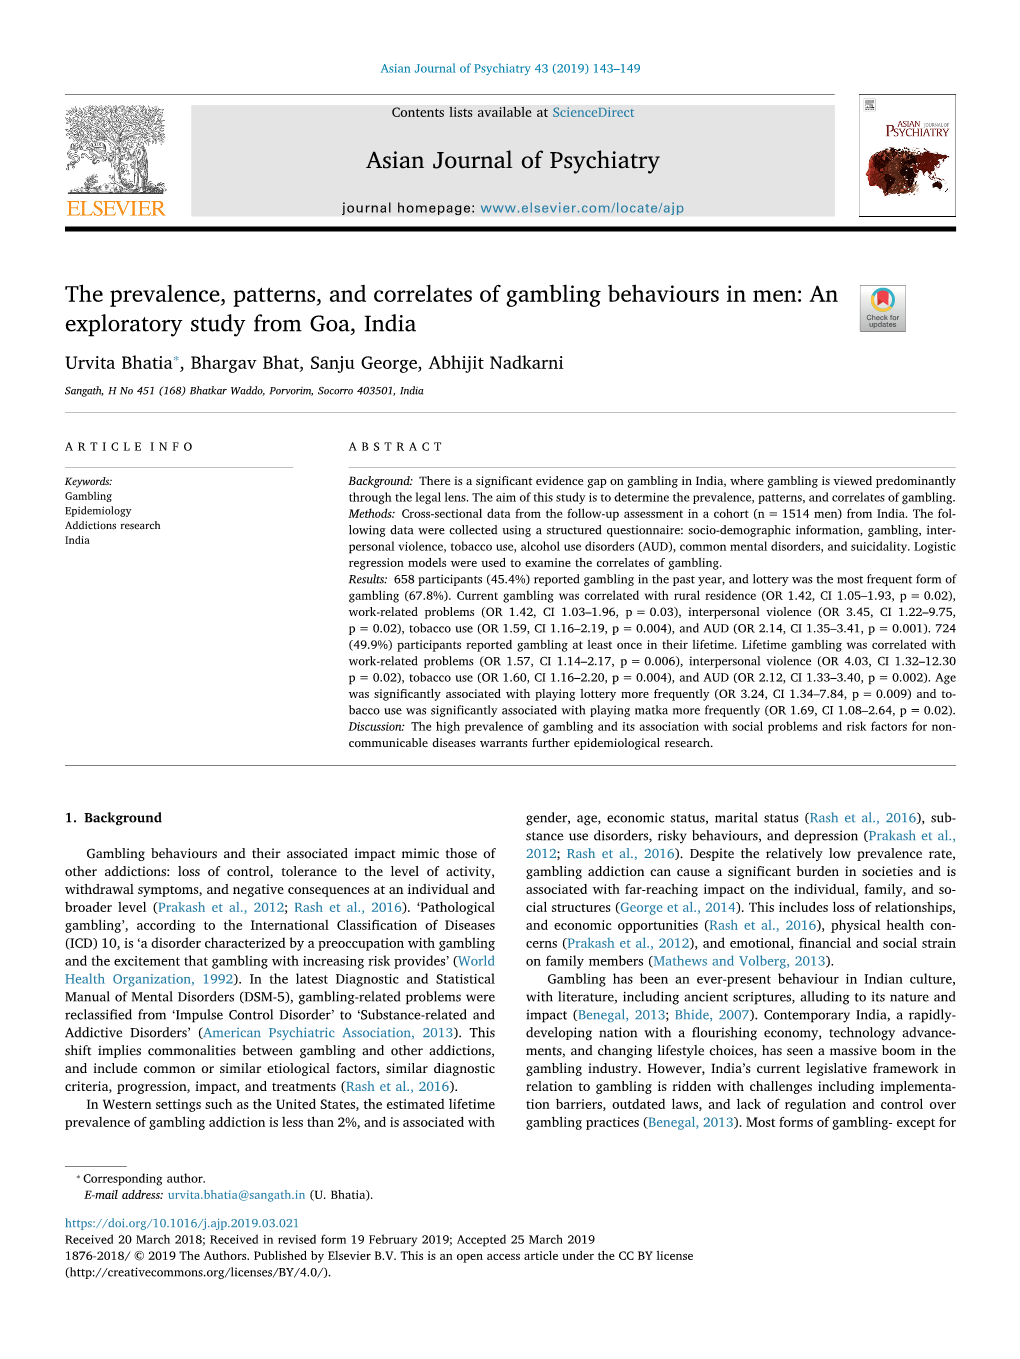 The Prevalence, Patterns, and Correlates of Gambling Behaviours